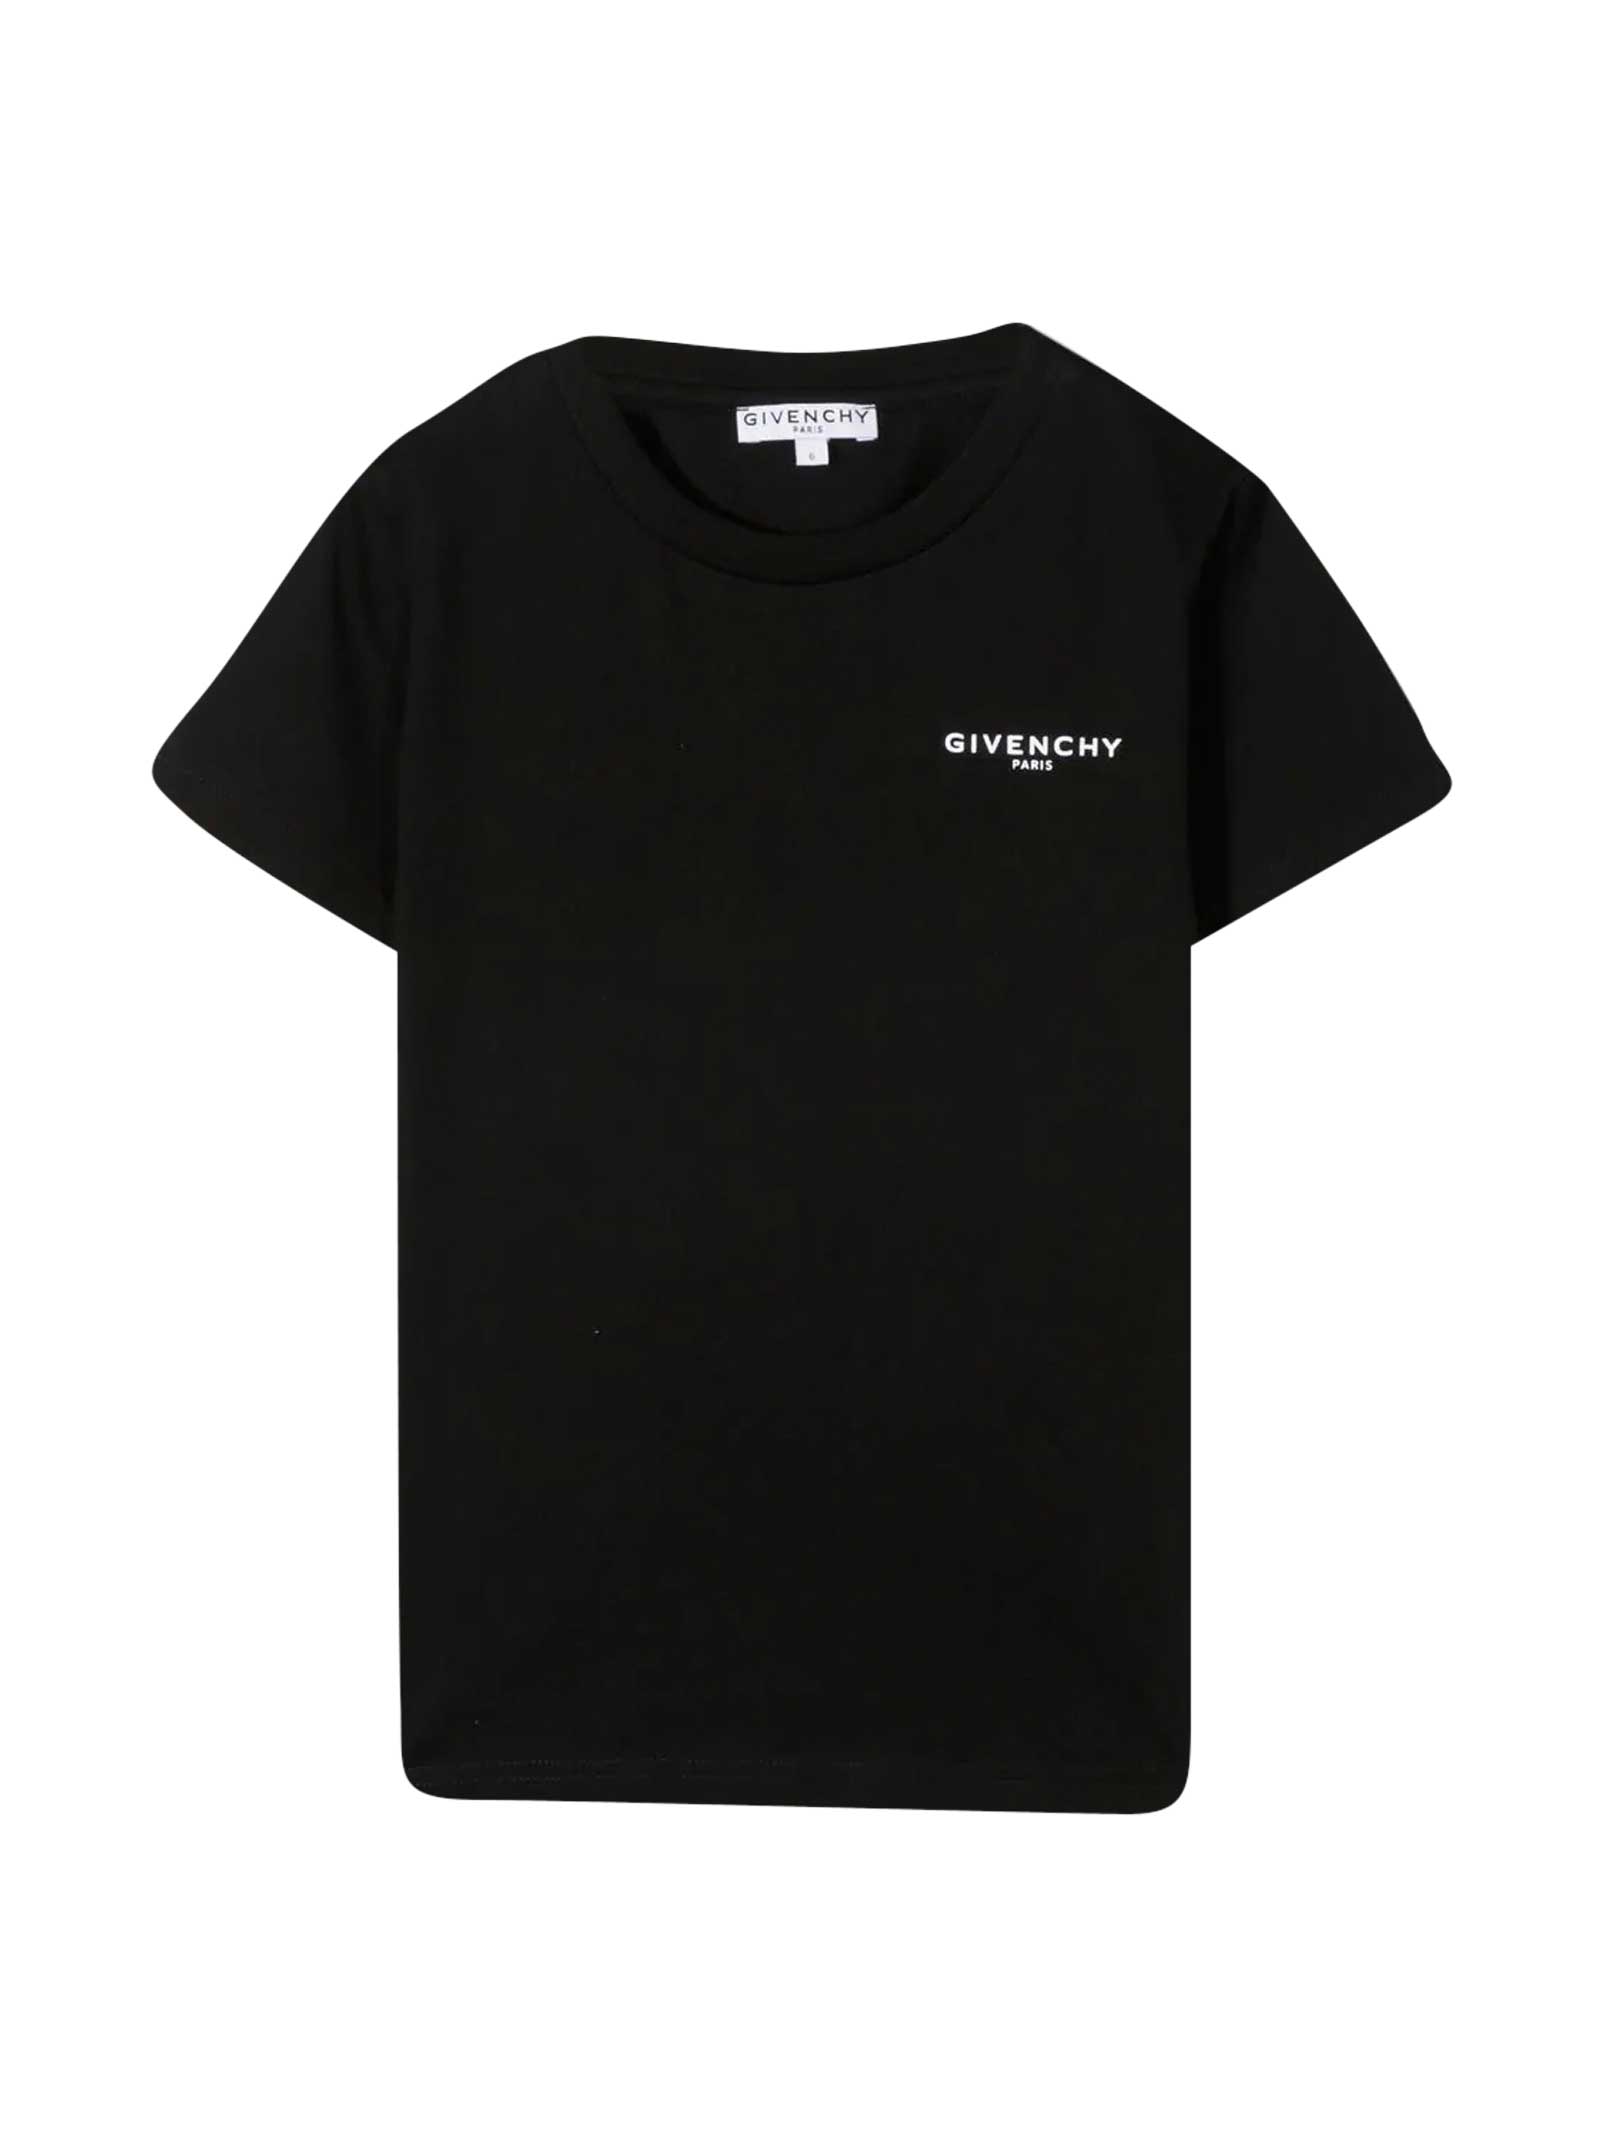 GIVENCHY T-SHIRT WITH PRINT,H25258 09B